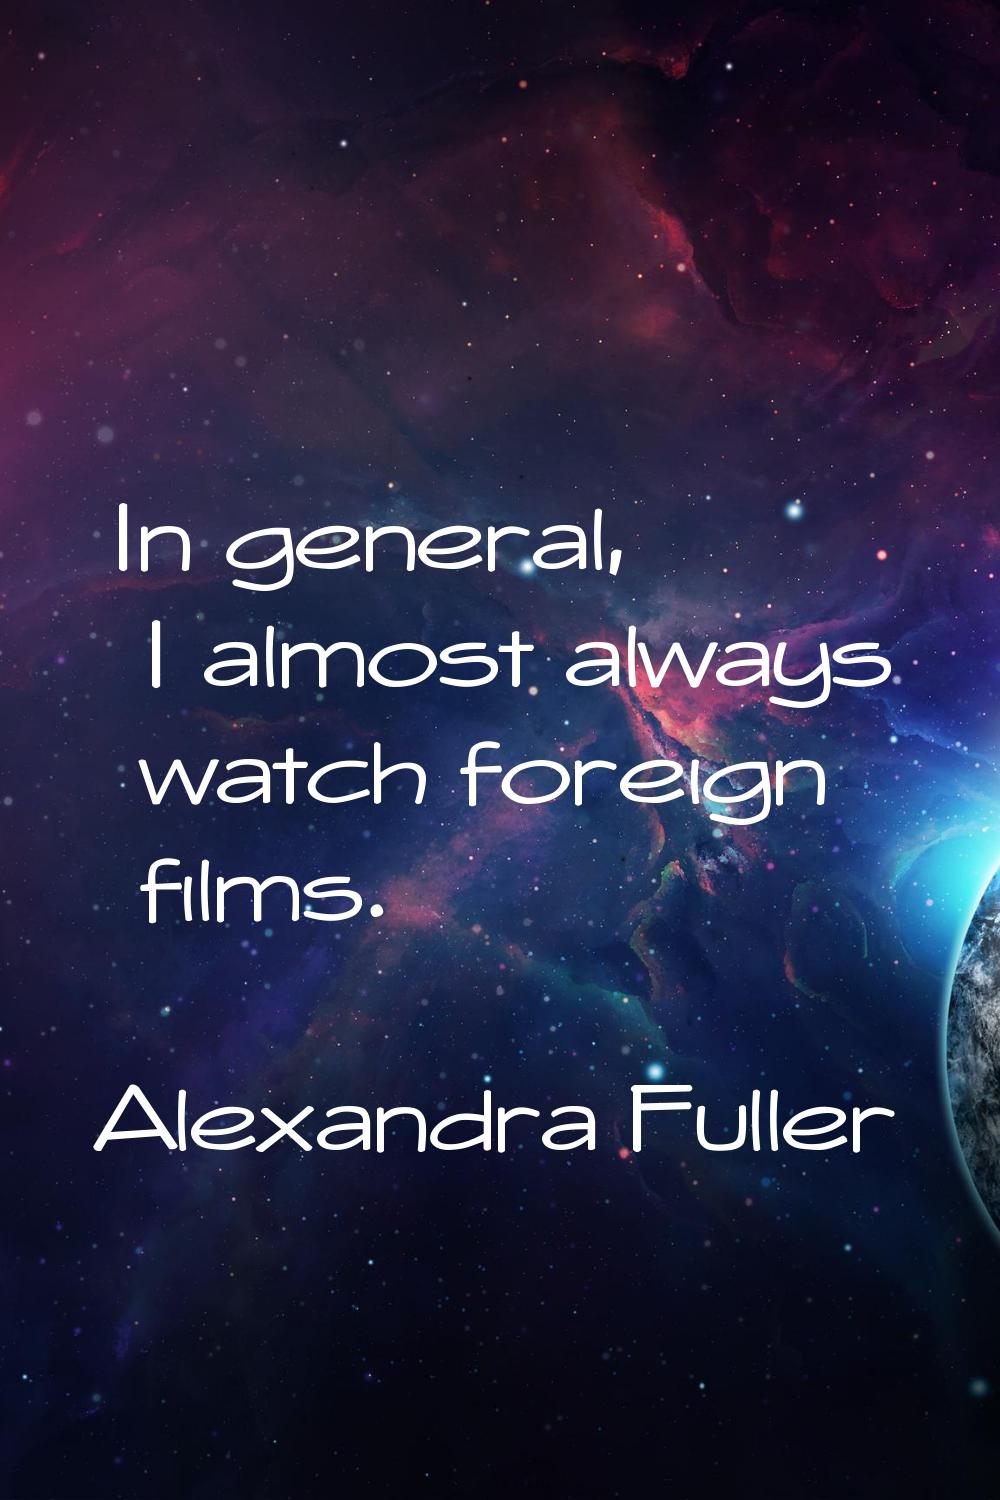 In general, I almost always watch foreign films.